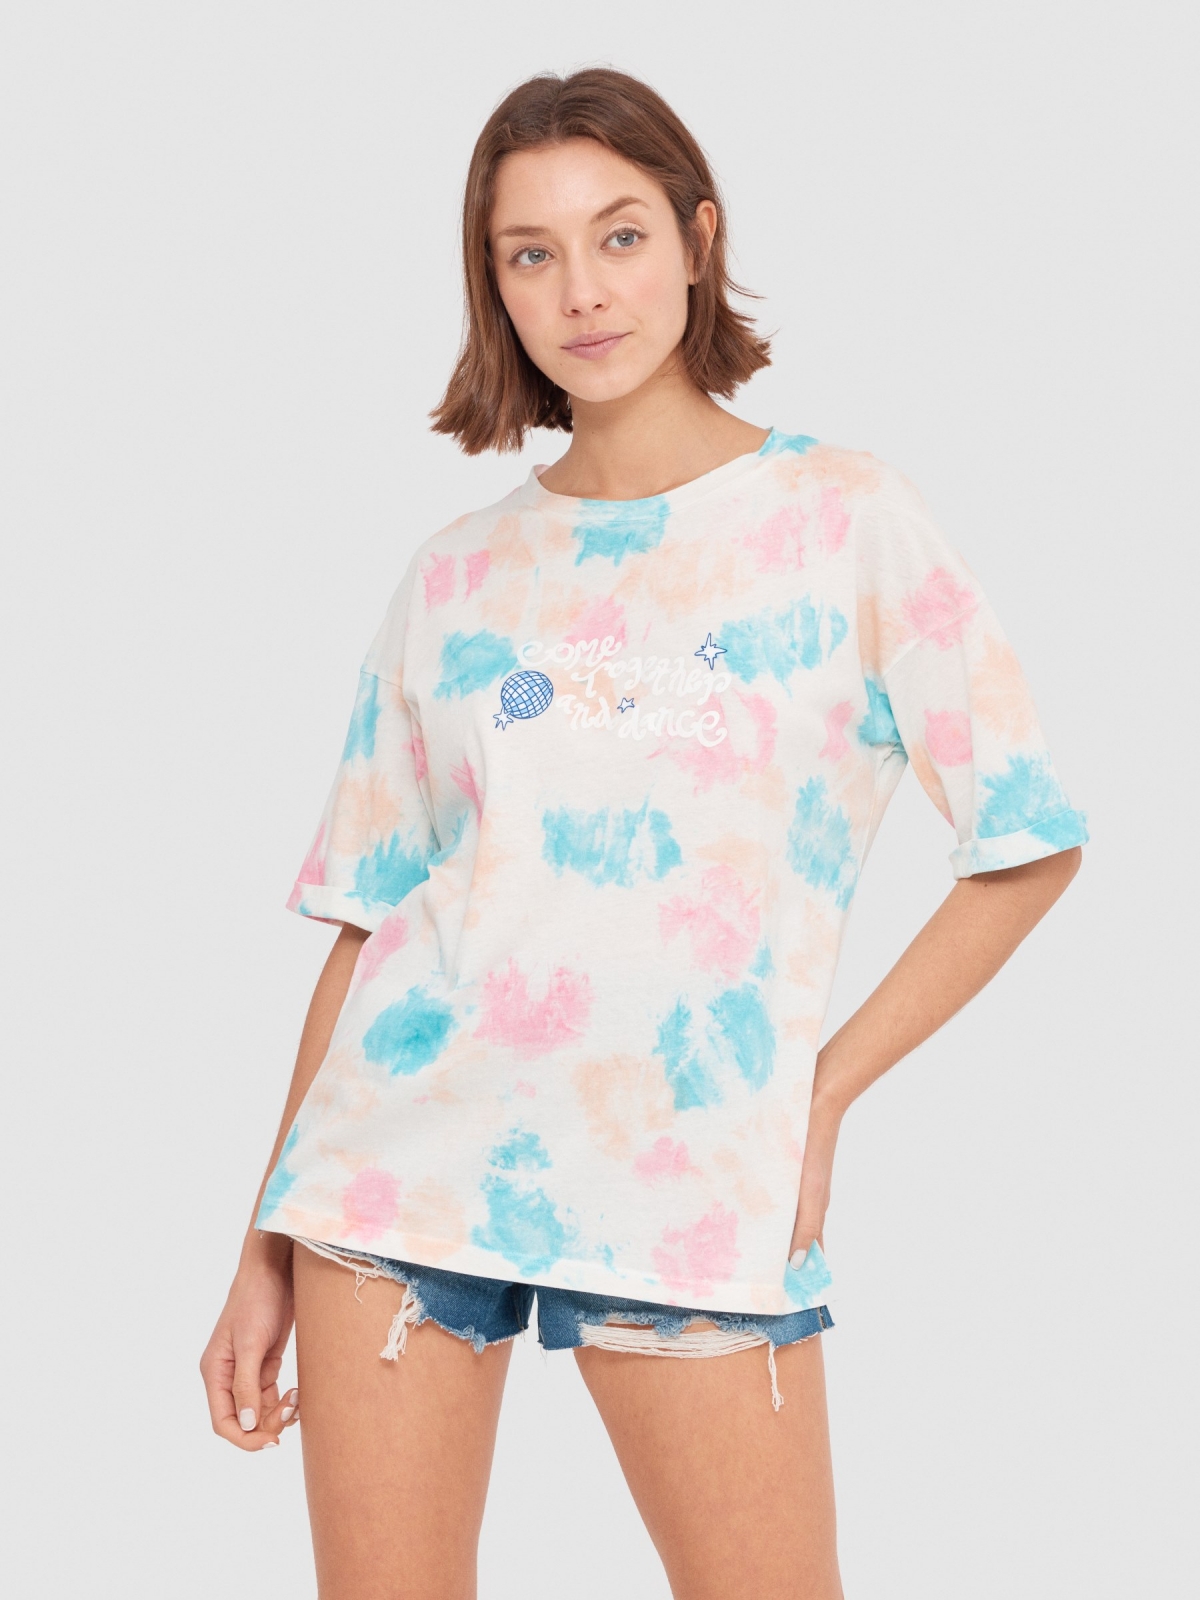 Tie dye disco t-shirt light pink middle front view